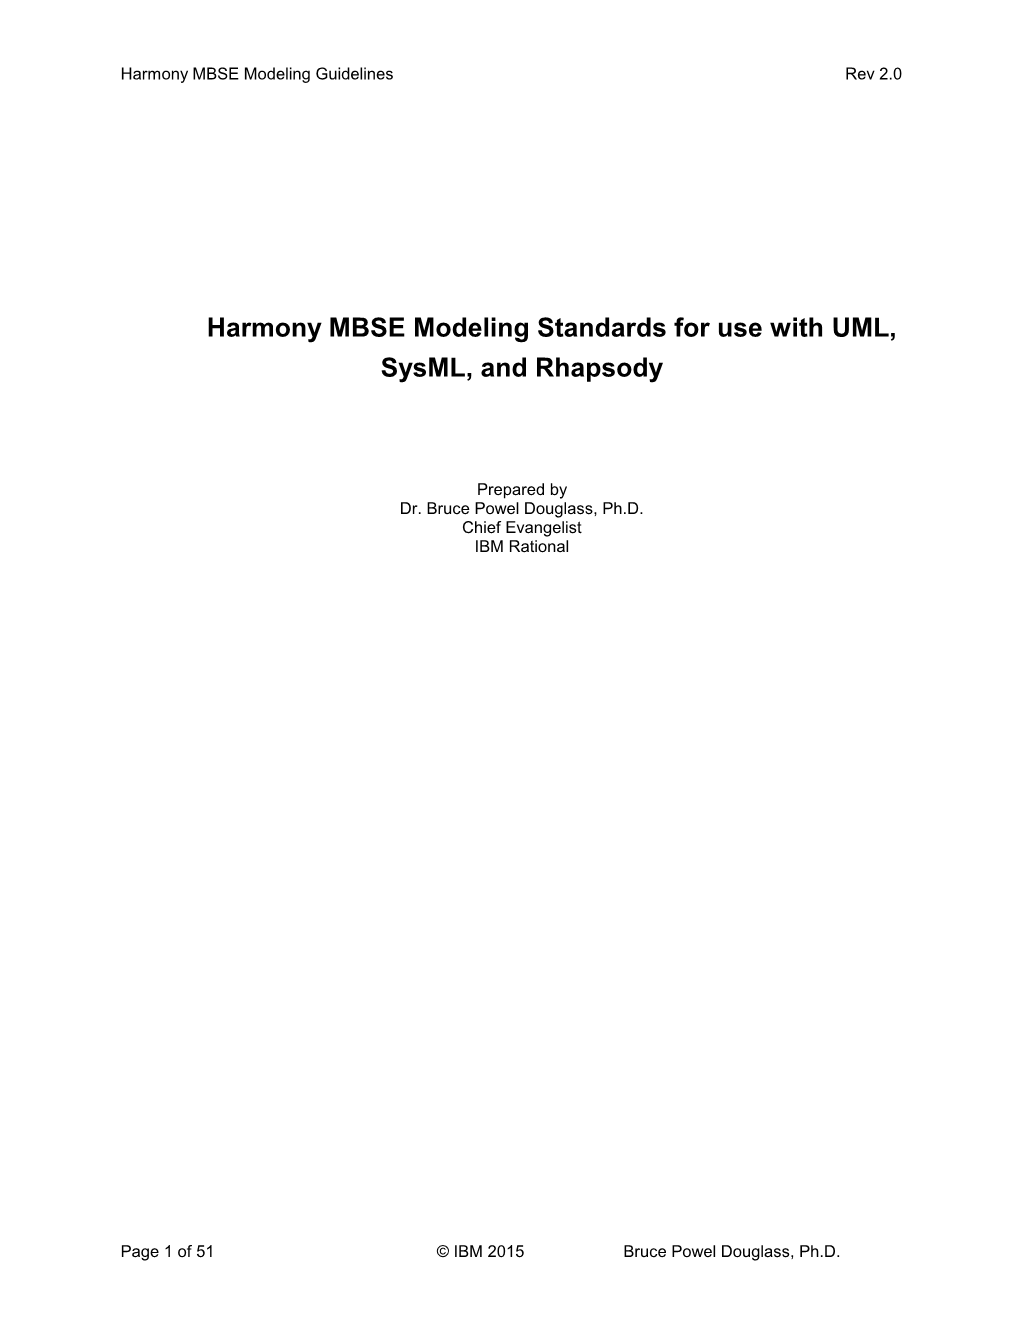 Harmony MBSE Modeling Guidelines 2.0.Pdf